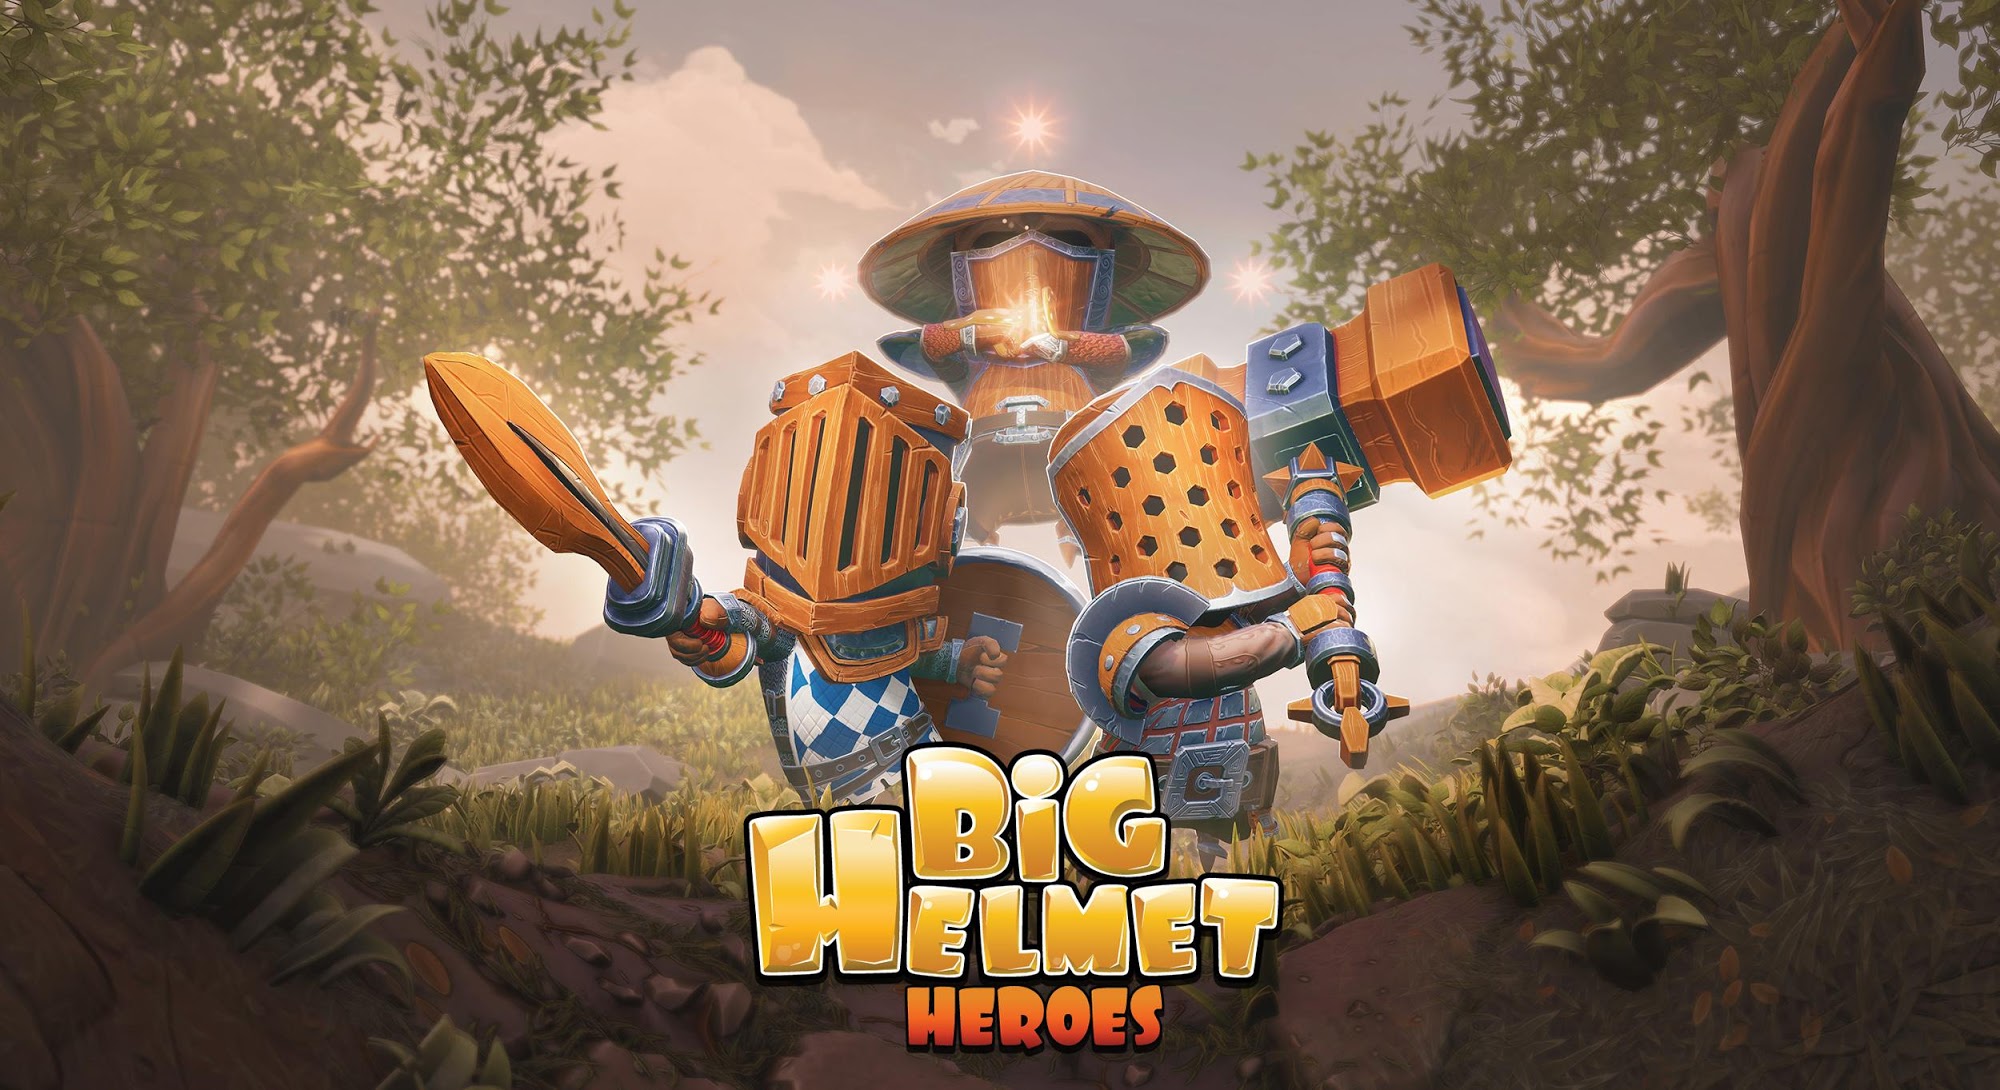 Big Helmet Heroes Download APK for Android (Free) mob.org